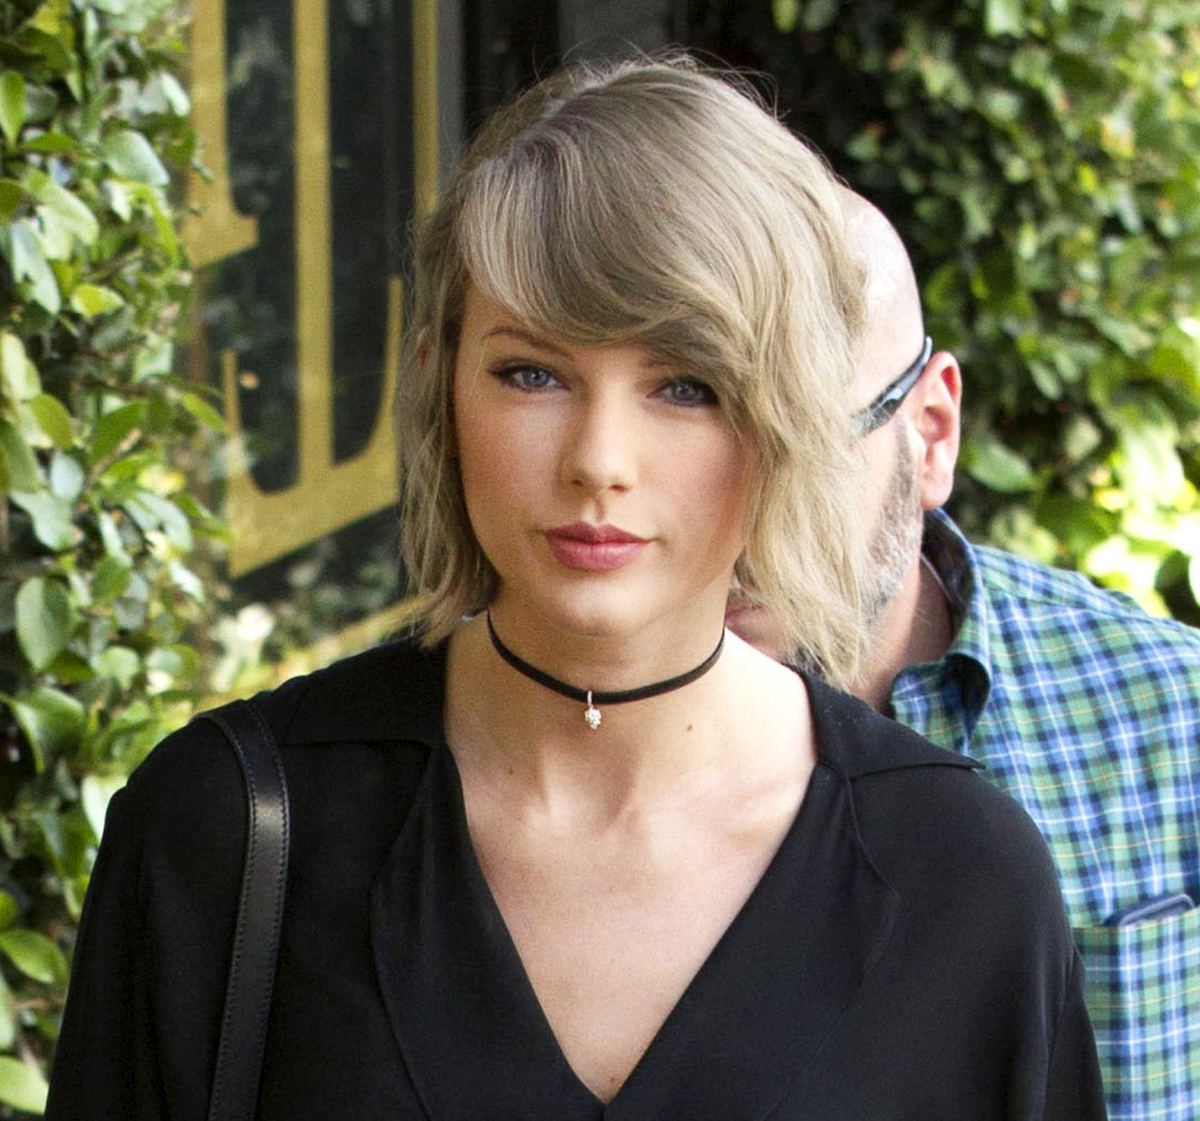 Why is Taylor Swift wearing a leather harness?